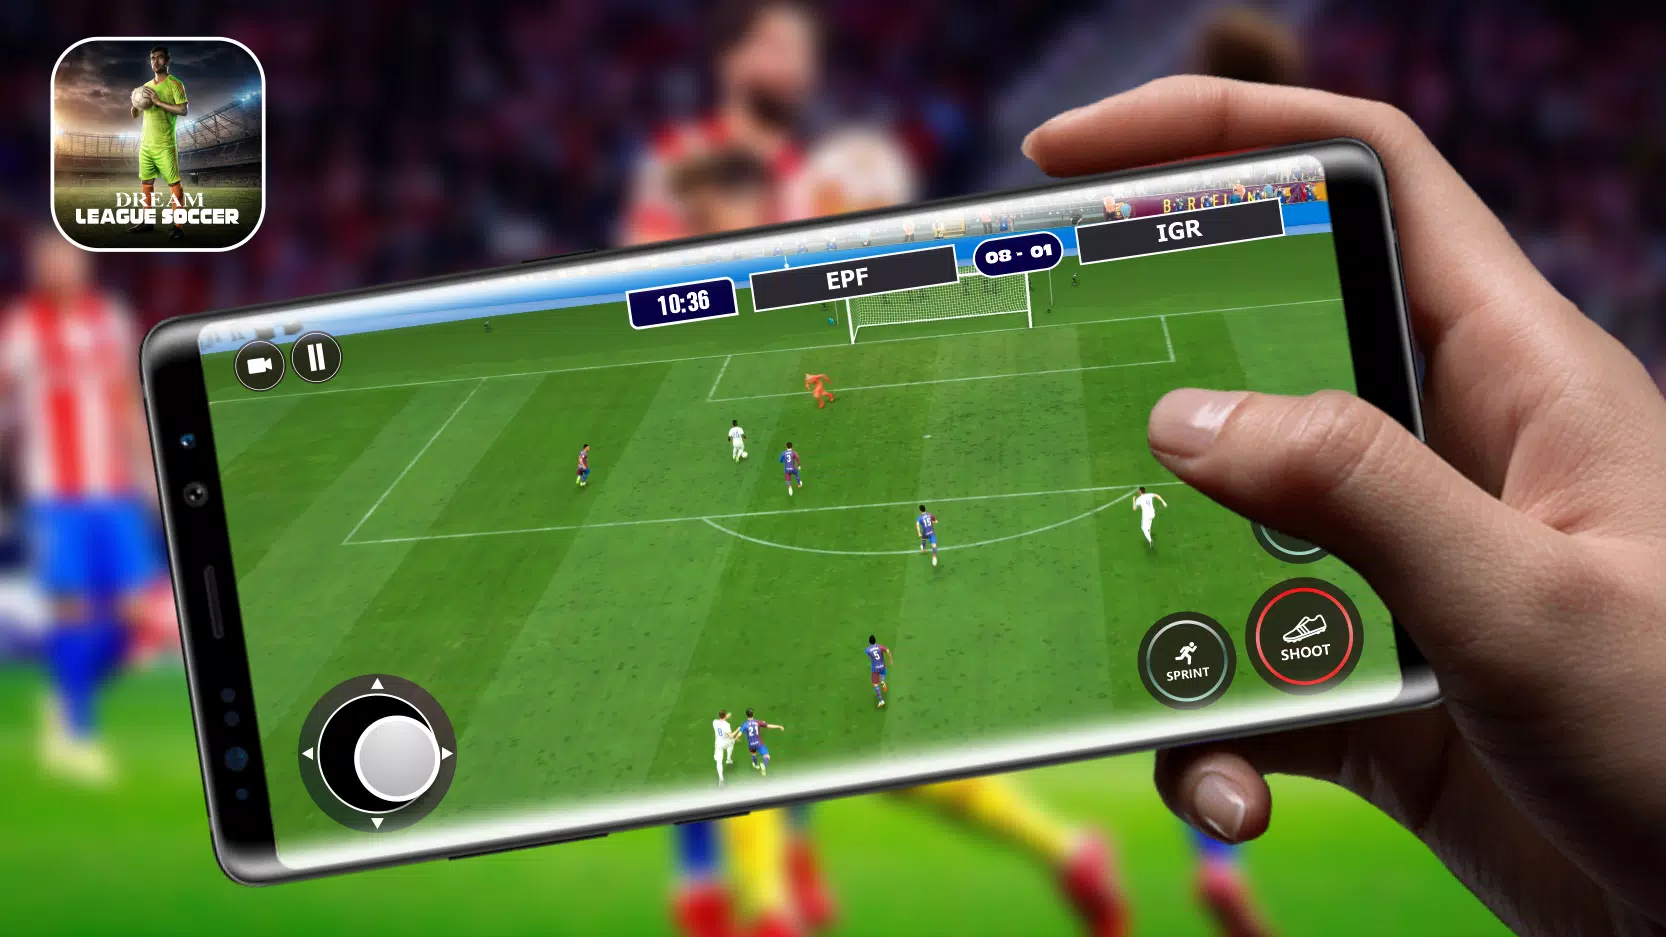 Dream League Soccer 2022 Game - Download this Free Sports Game